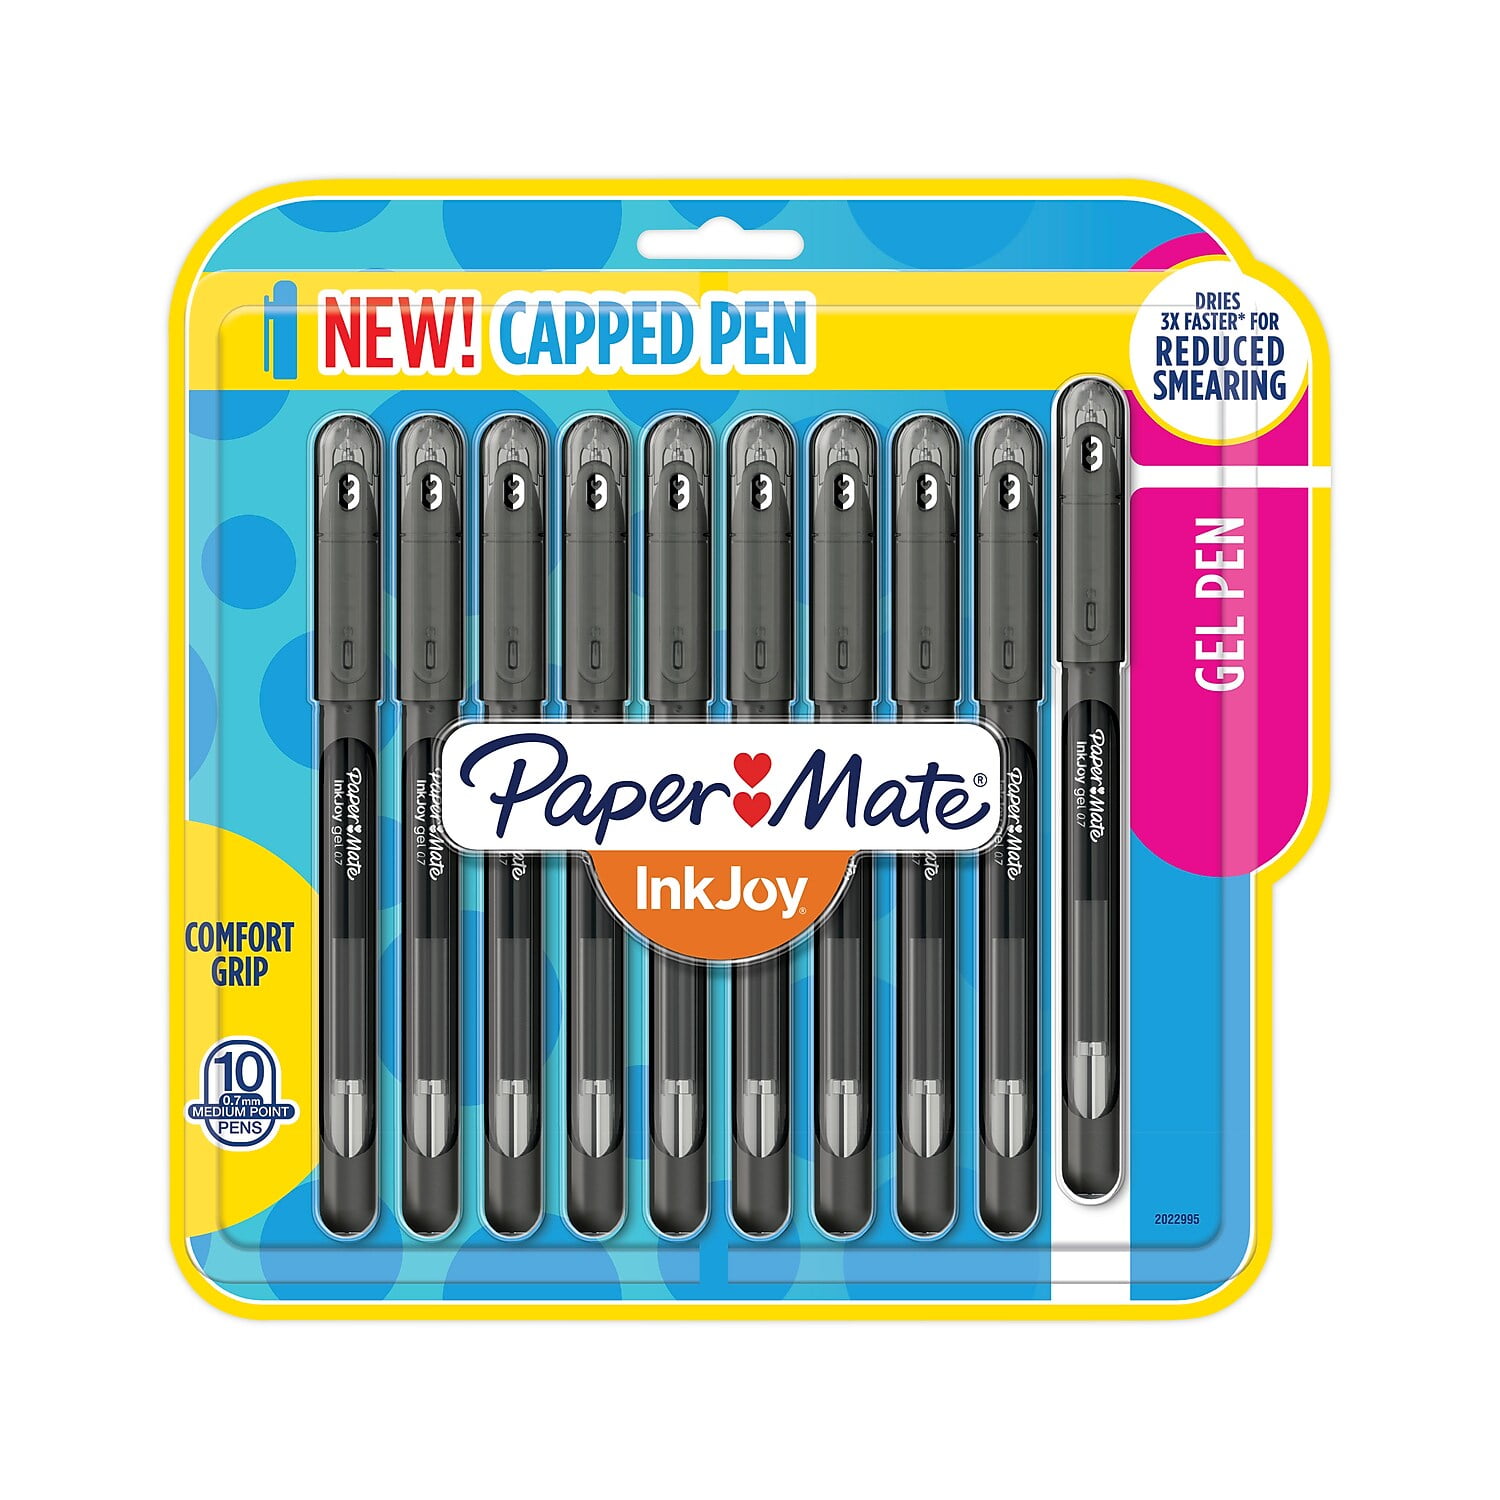 Paperhaters Need Not Apply: The Papermate Inkjoy Gel — The